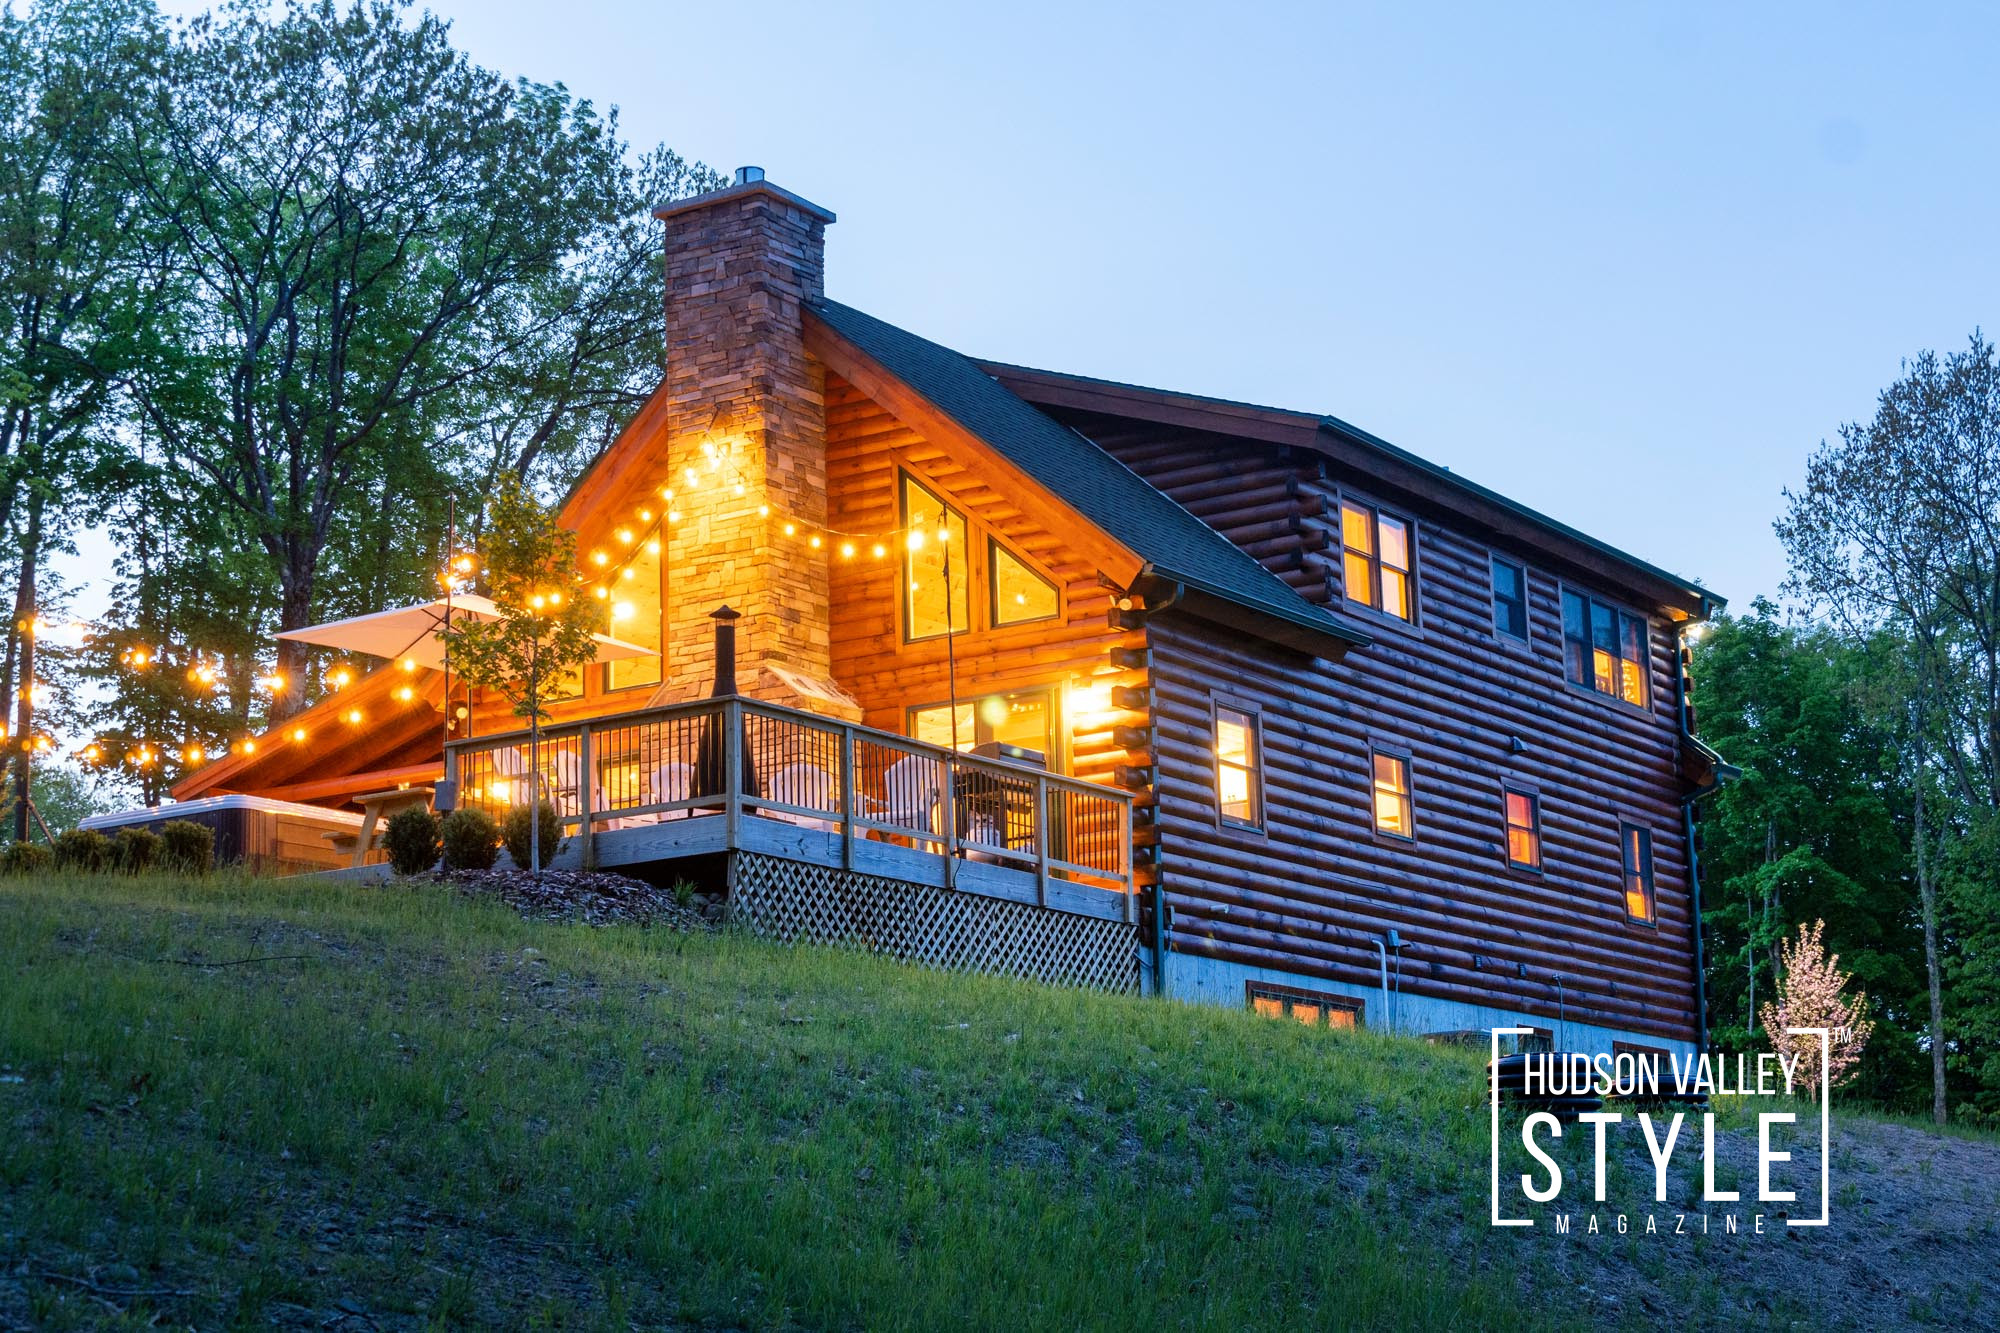 The Catskill Mountains Cabin – Airbnb Photography in the Hudson Valley and Catskills: Meet Alluvion Media – The best Airbnb Photographer in Upstate, NY